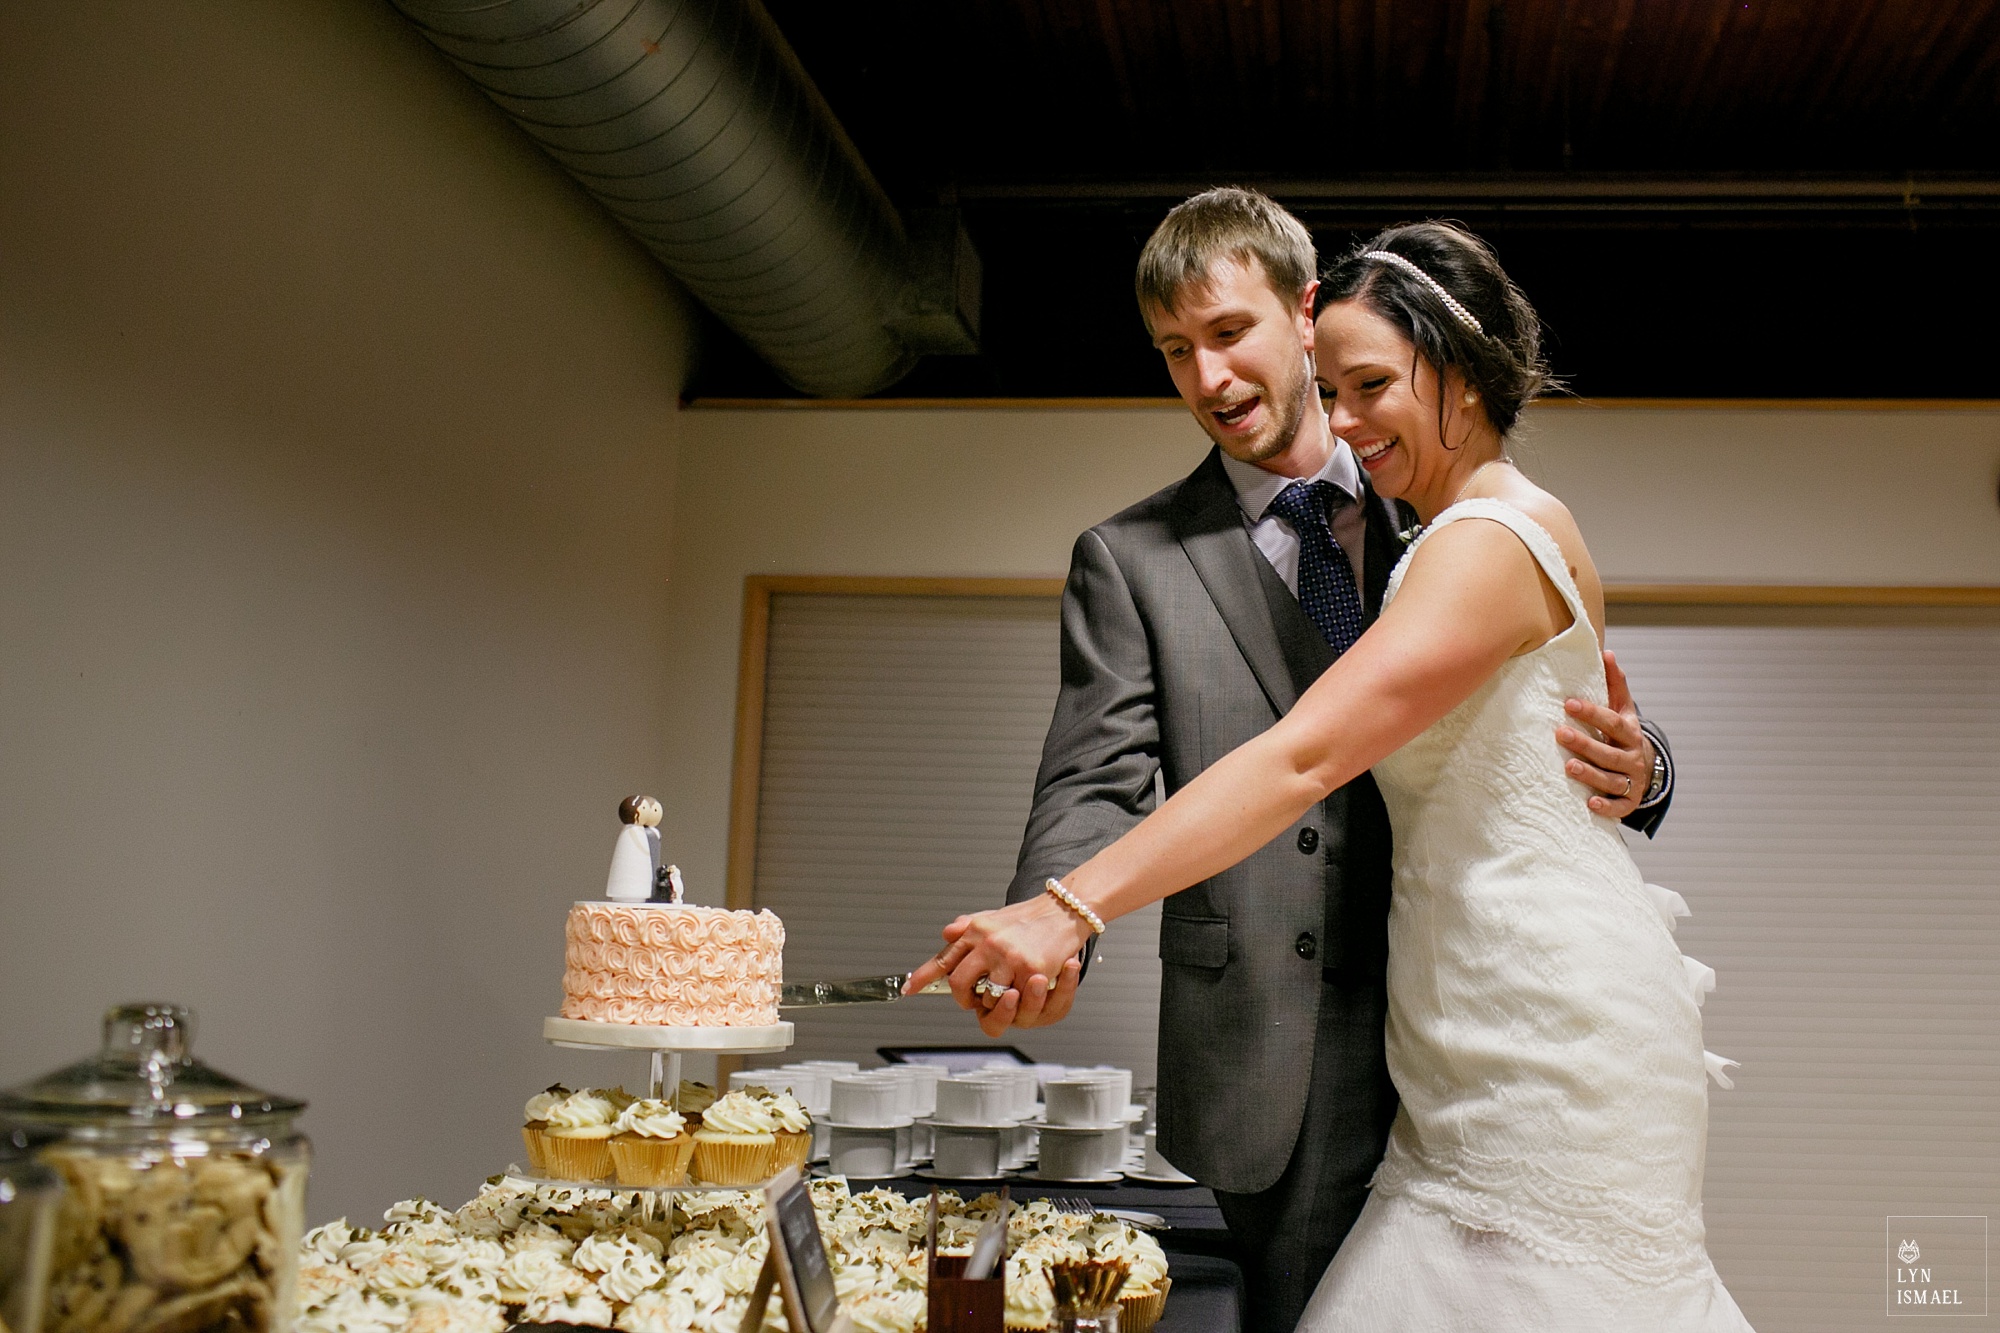 Bride and groom cuts their wedding cake at THEMUSEUM in Kitchener, Ontario.